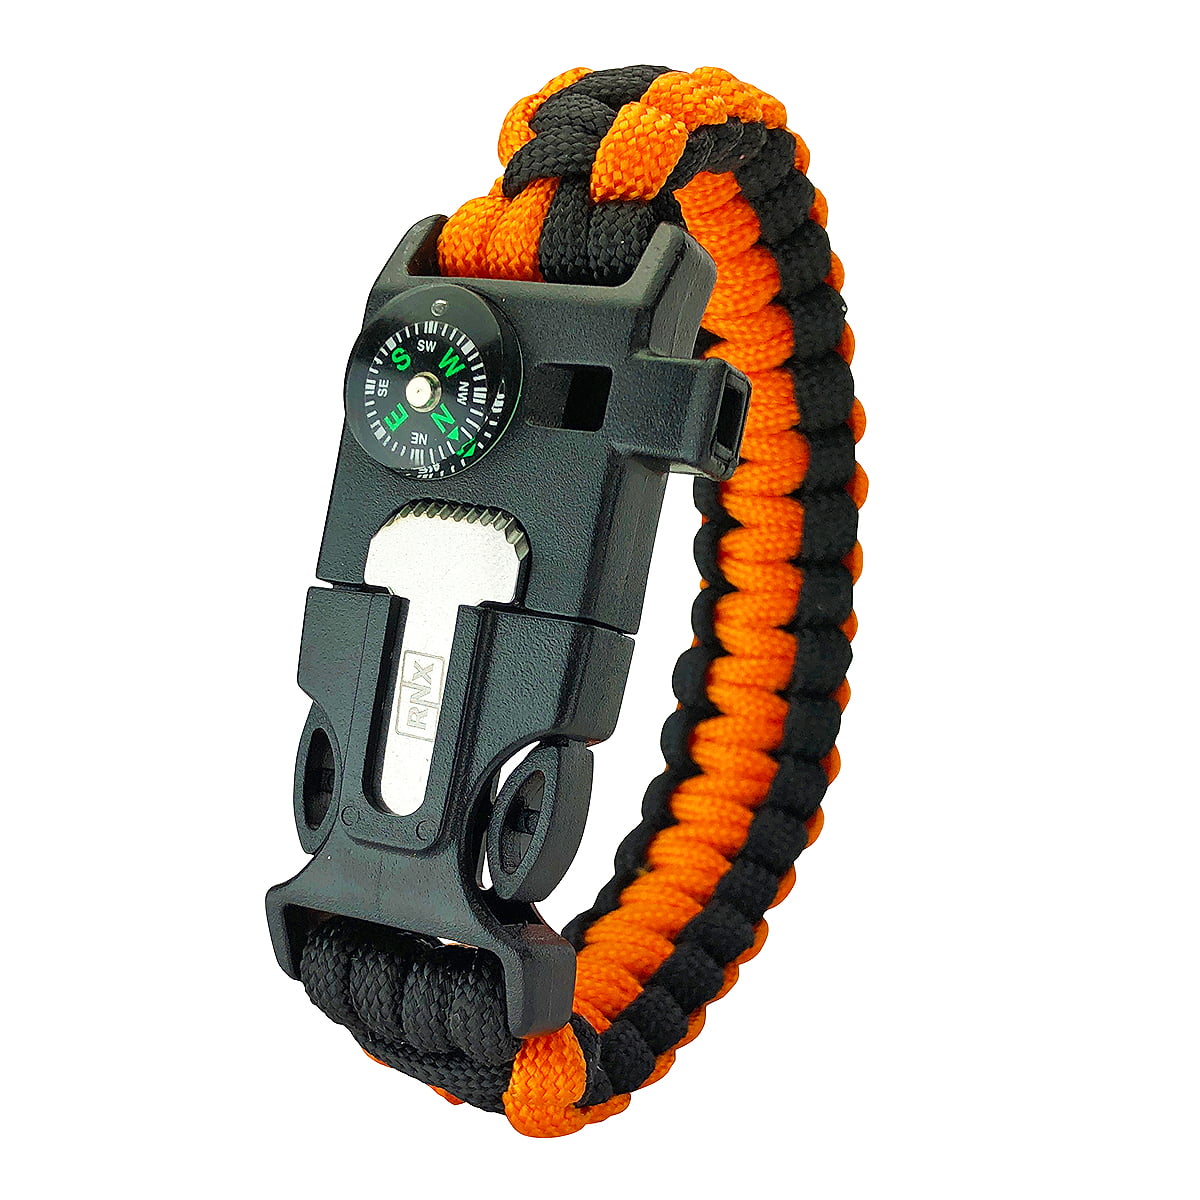 ELK Paracord Survival Bracelets Include Adjustable Size Loud Whistle  Emergency Knife and Fire Starter  Perfect for Outdoor Hiking Camping  Fishing and Hunting Black and BlackOrange 2 Pack  Walmartcom